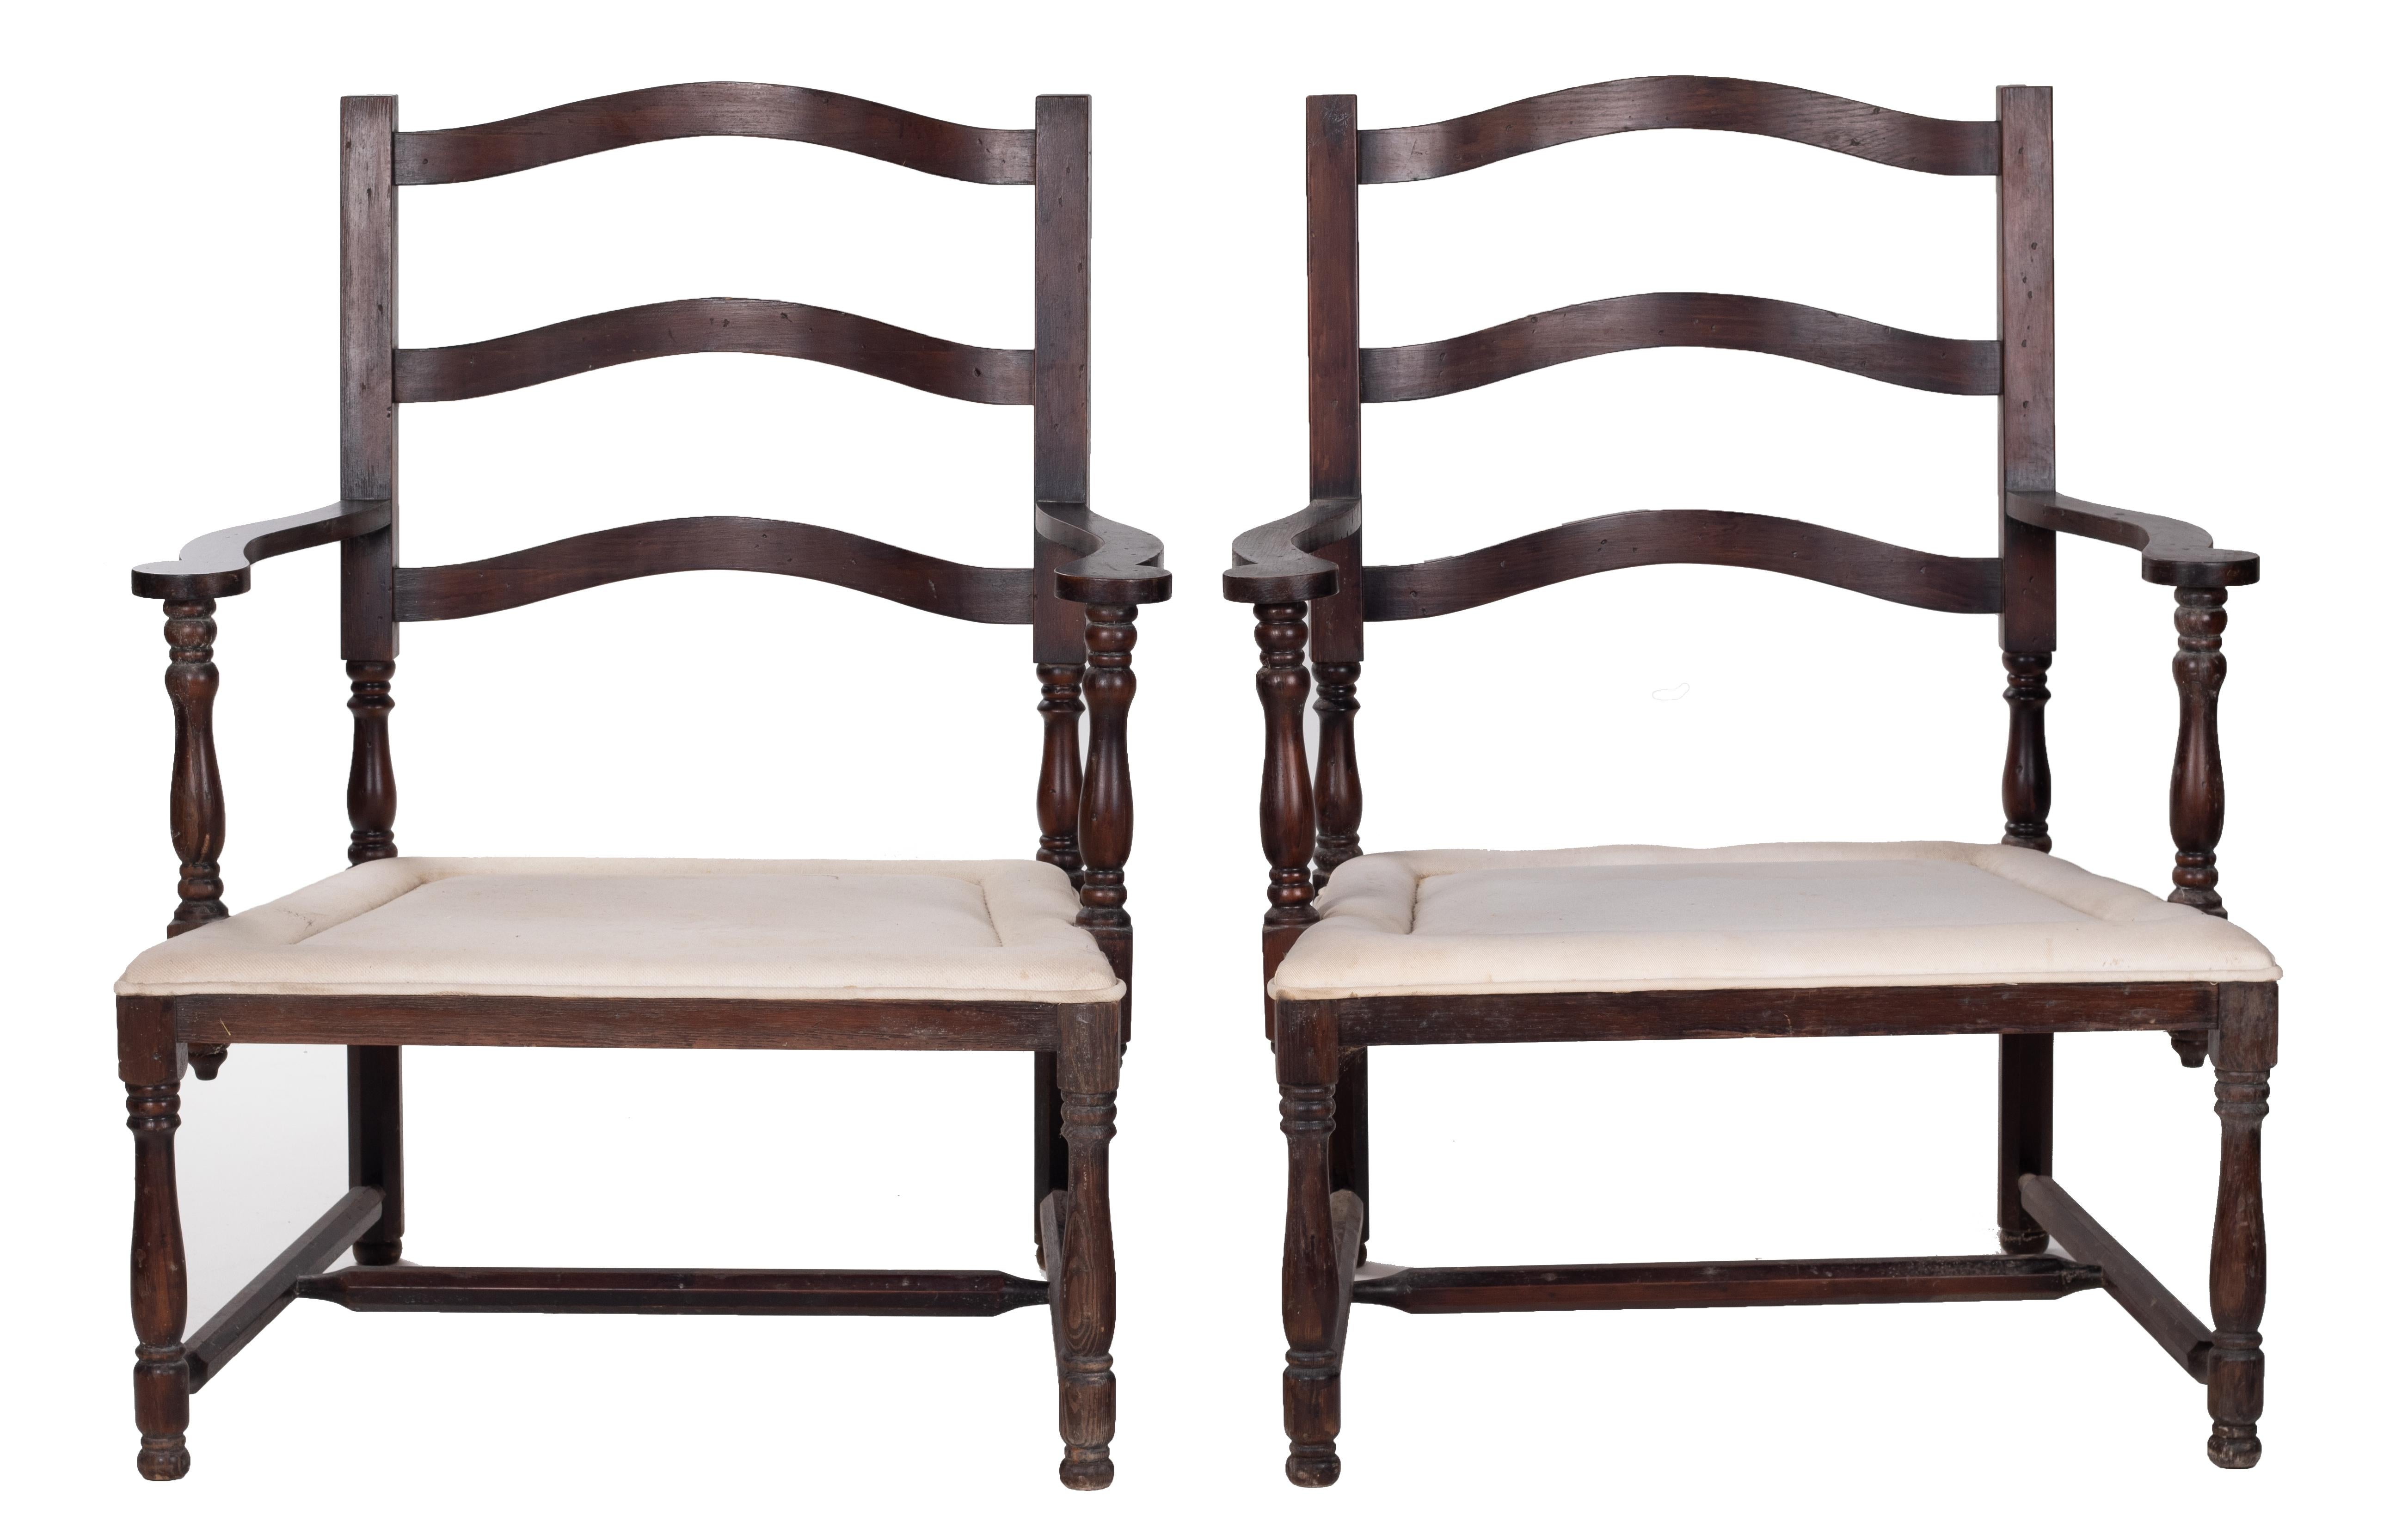 1930s pair of French rustic vintage wooden armchairs.